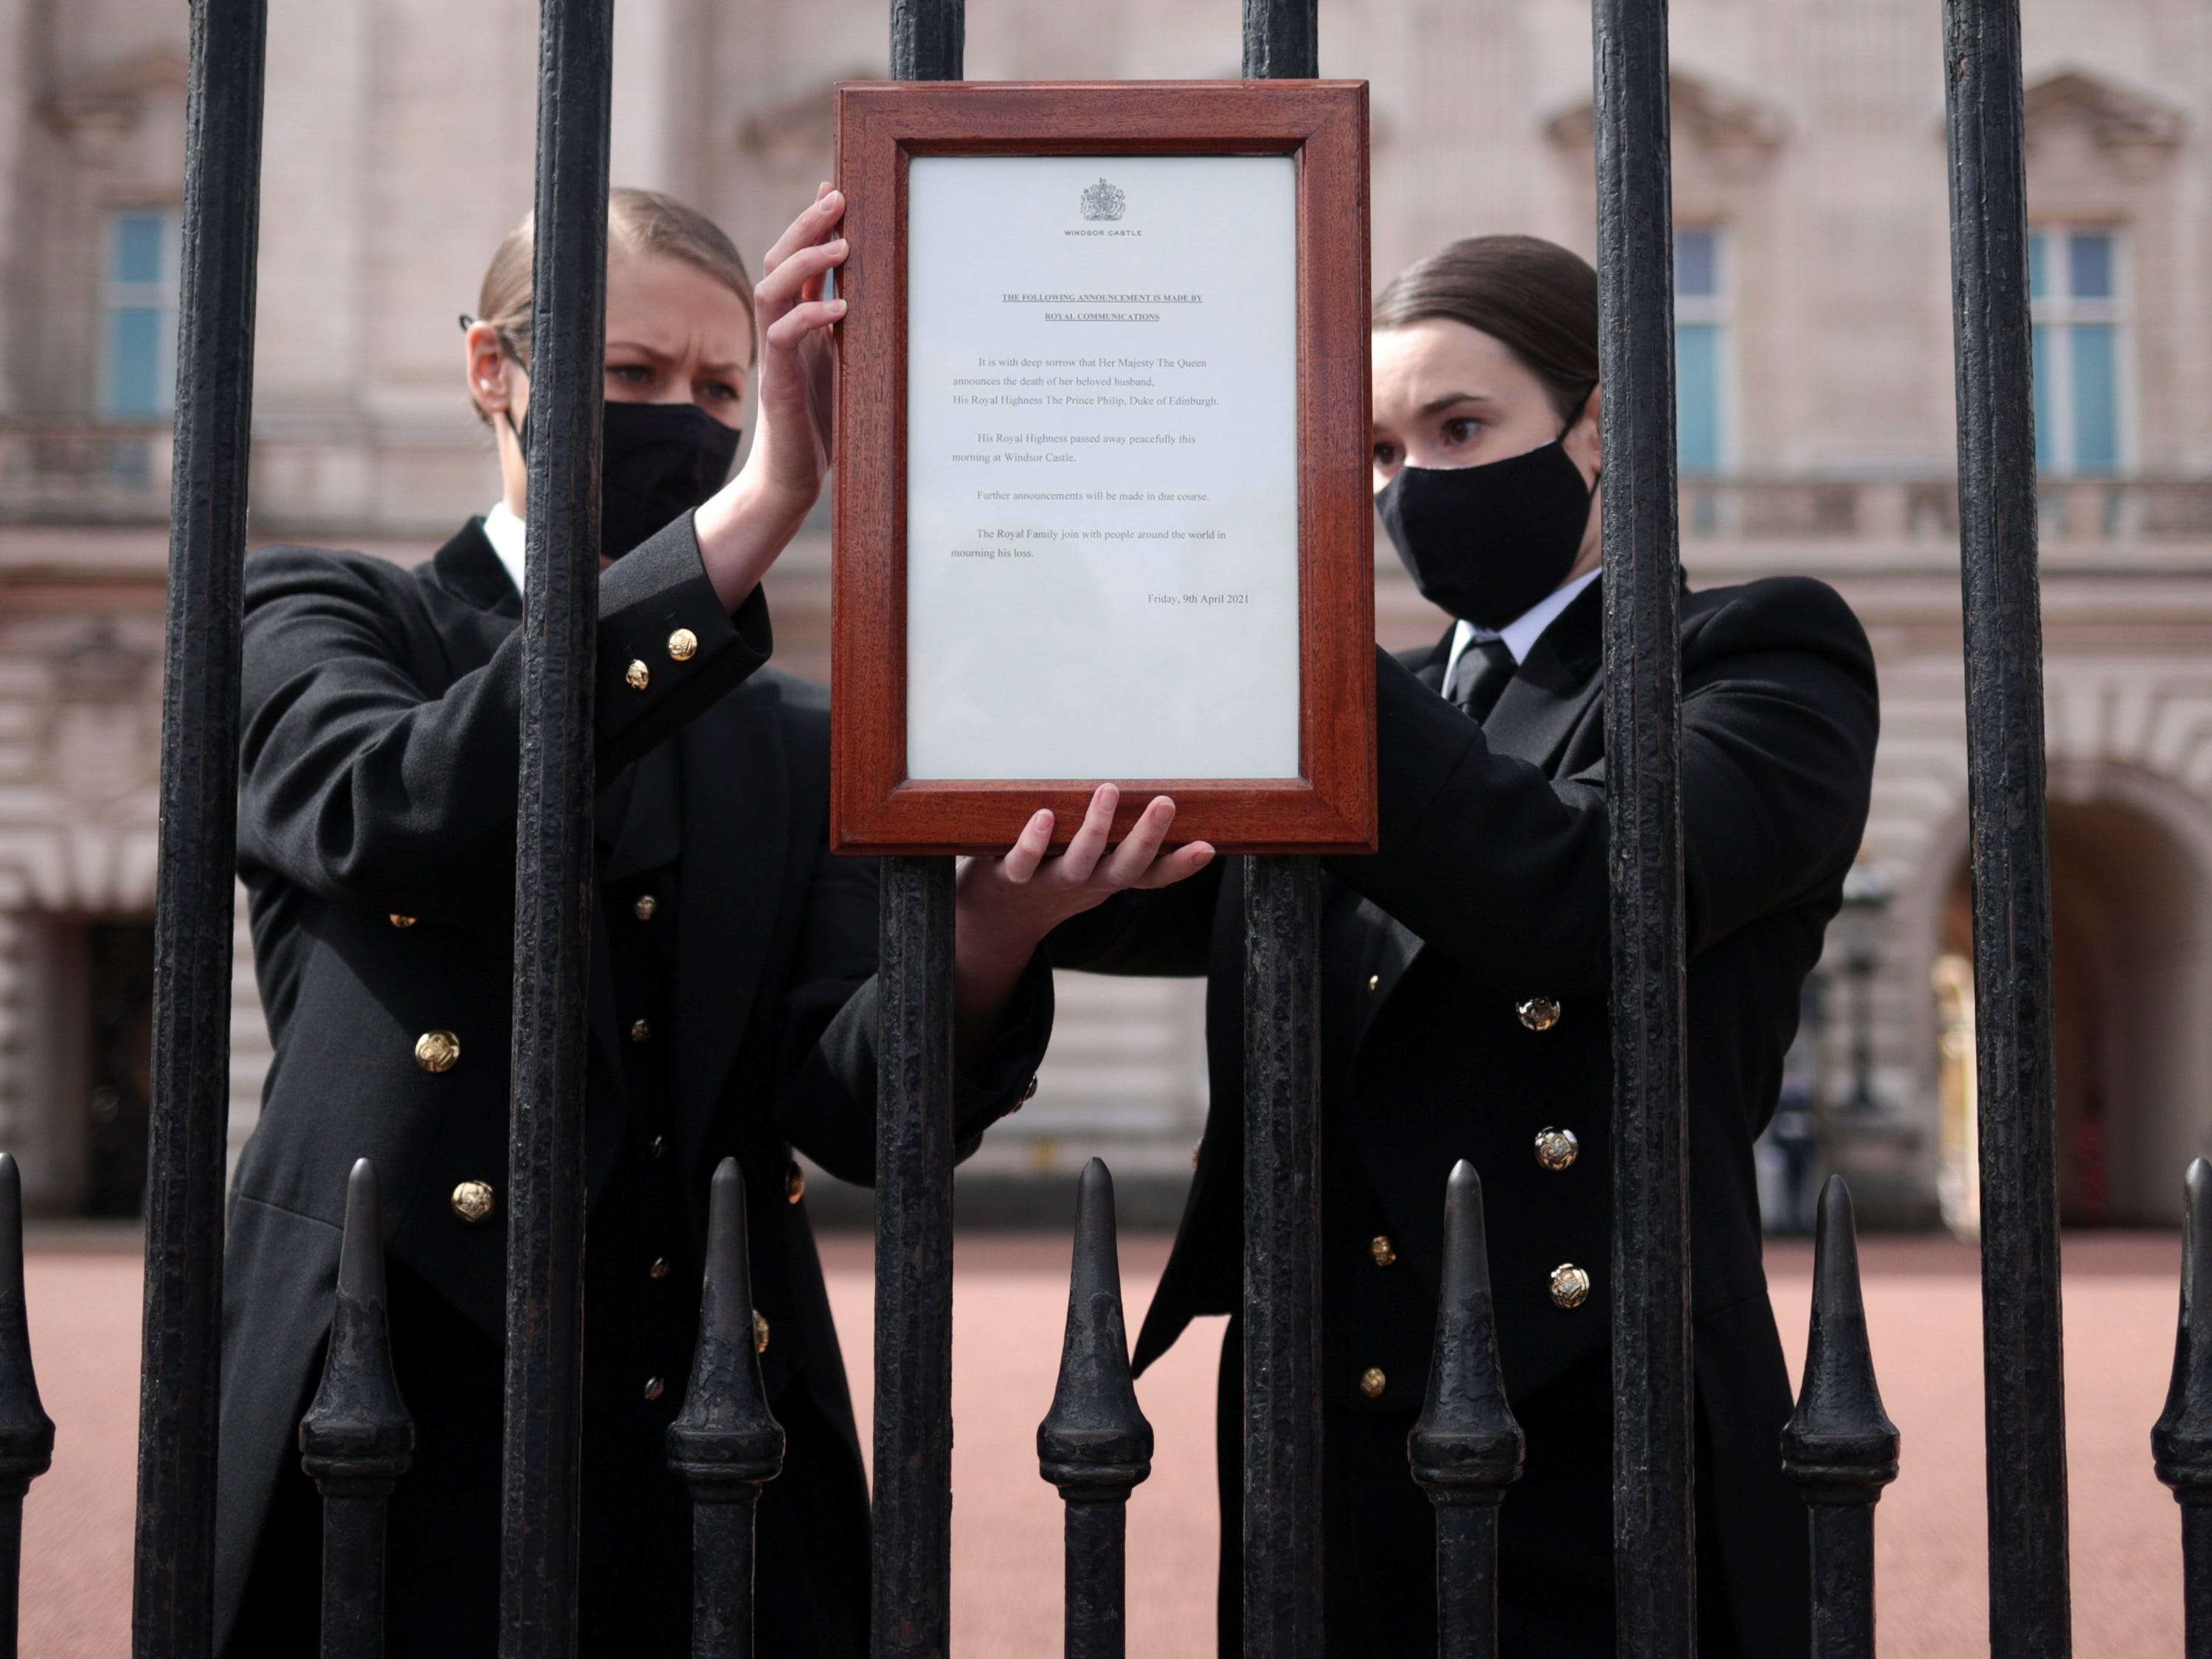 Photos show Buckingham Palace staff hanging a sign on its front gates